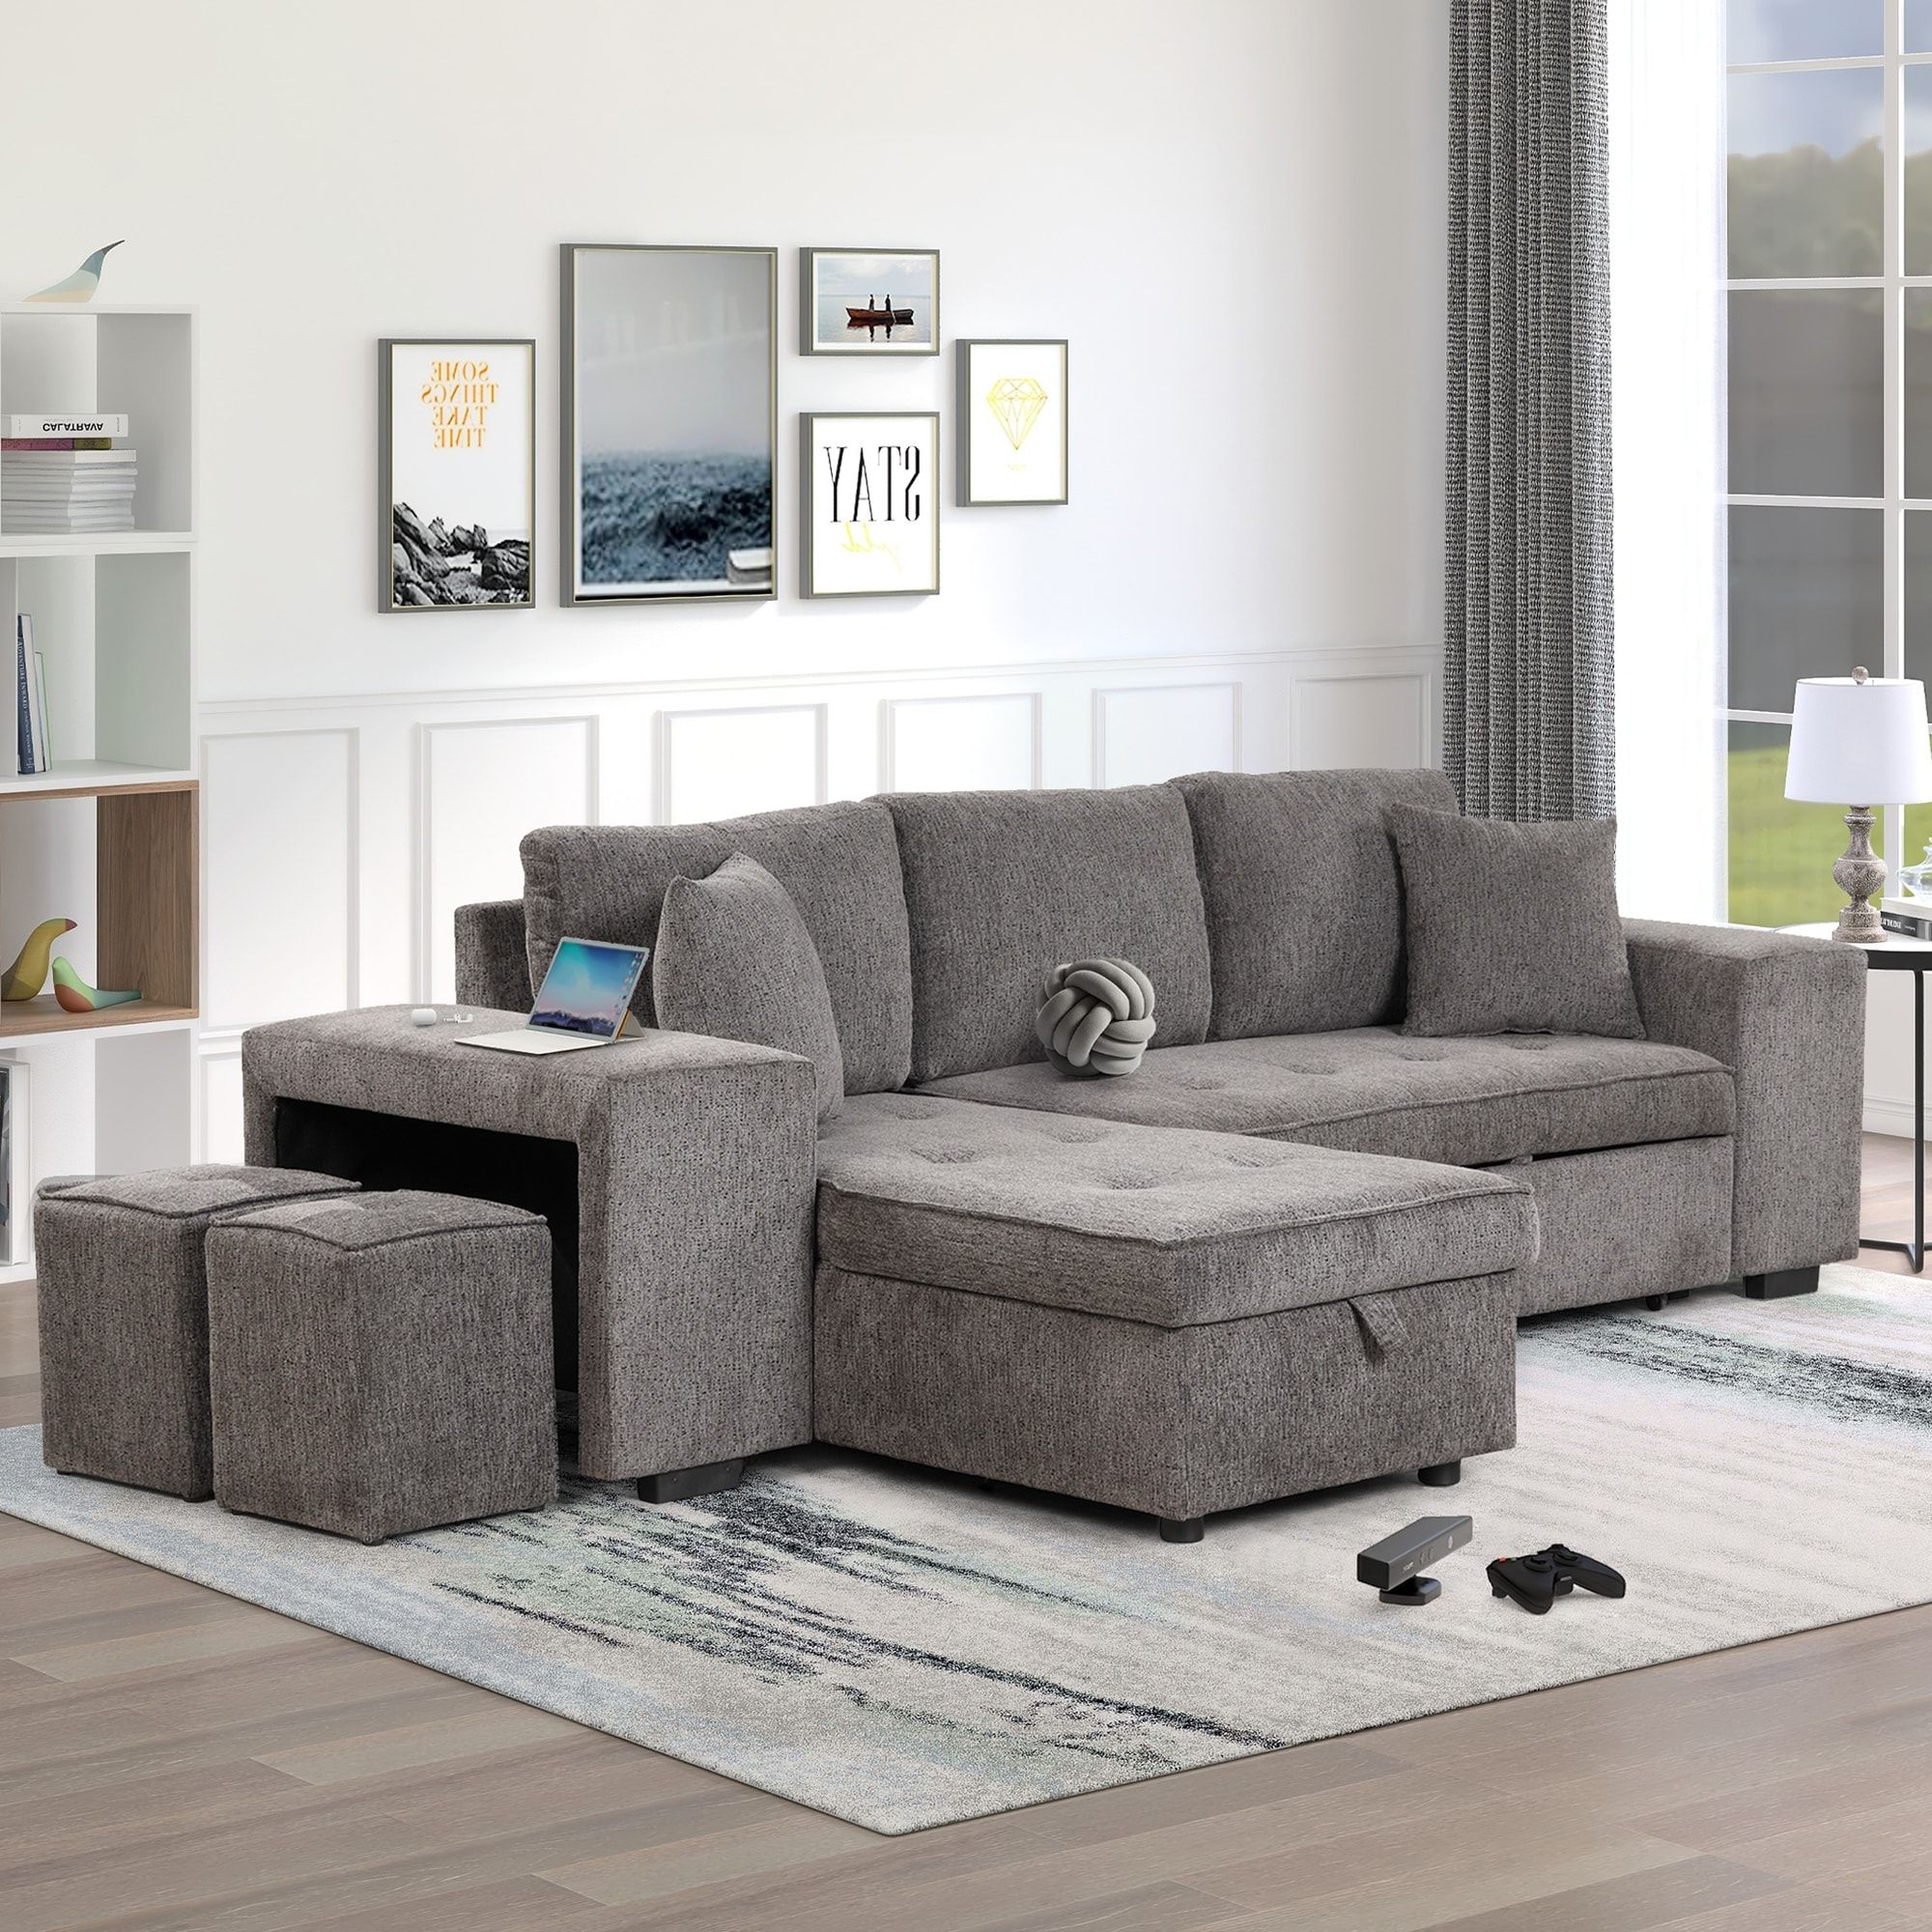 104" L Shape 3 Seat Reversible Sectional Sofa, Pull Out Sleeper Sofa With  Storage Chaise And 2 Stools For Living Room – Overstock – 37989258 Throughout 3 Seat Sofa Sectionals With Reversible Chaise (View 6 of 20)